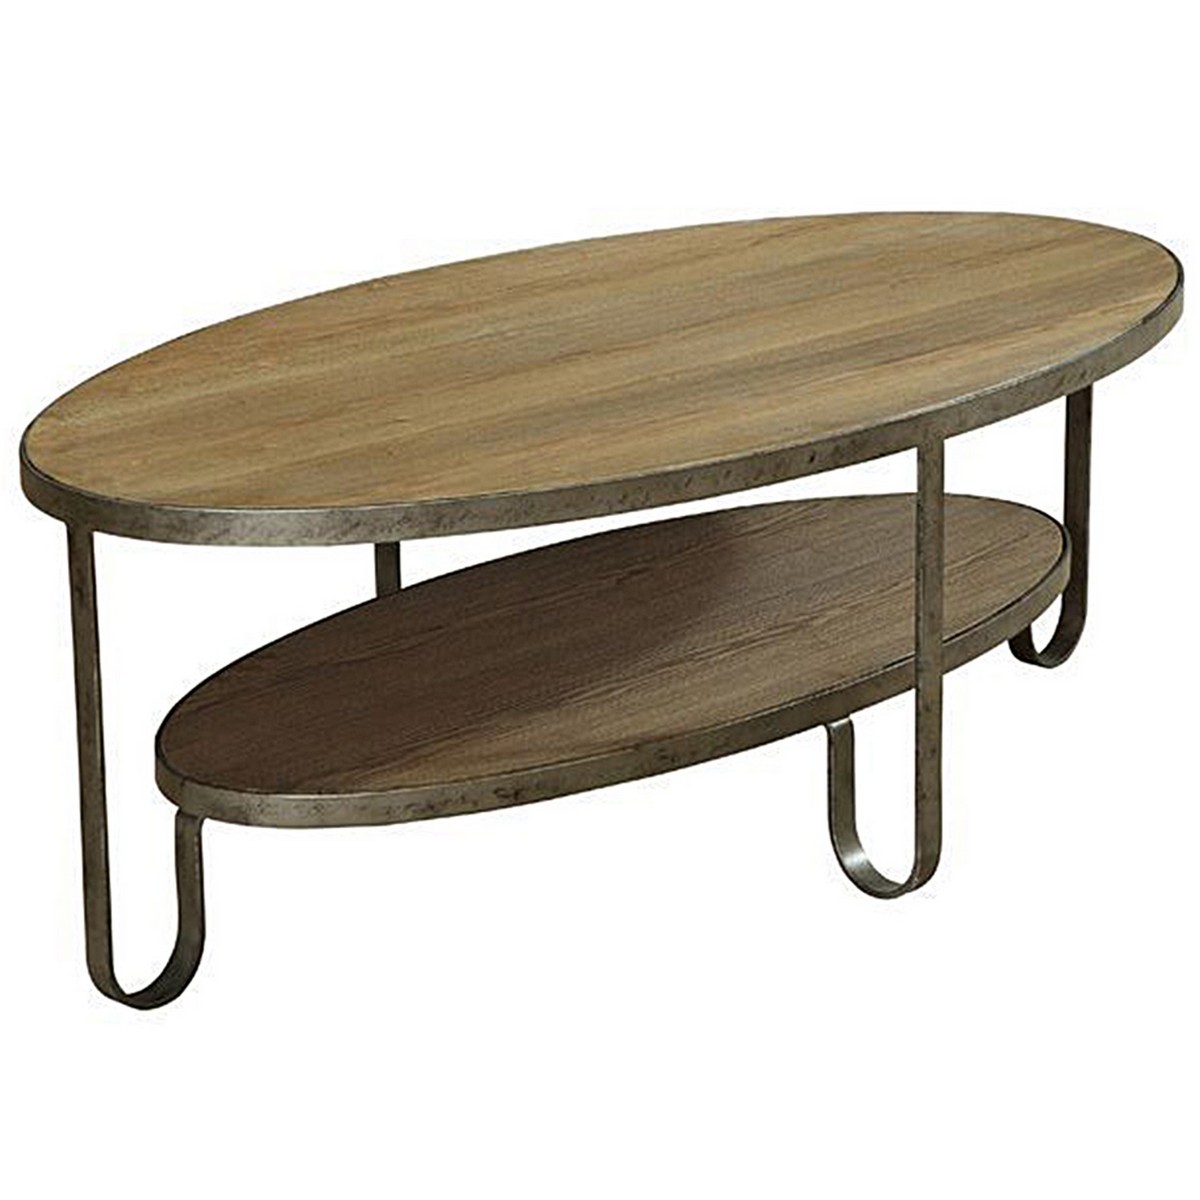 Armen Living Barstow Coffee Table With Gunmetal Frame